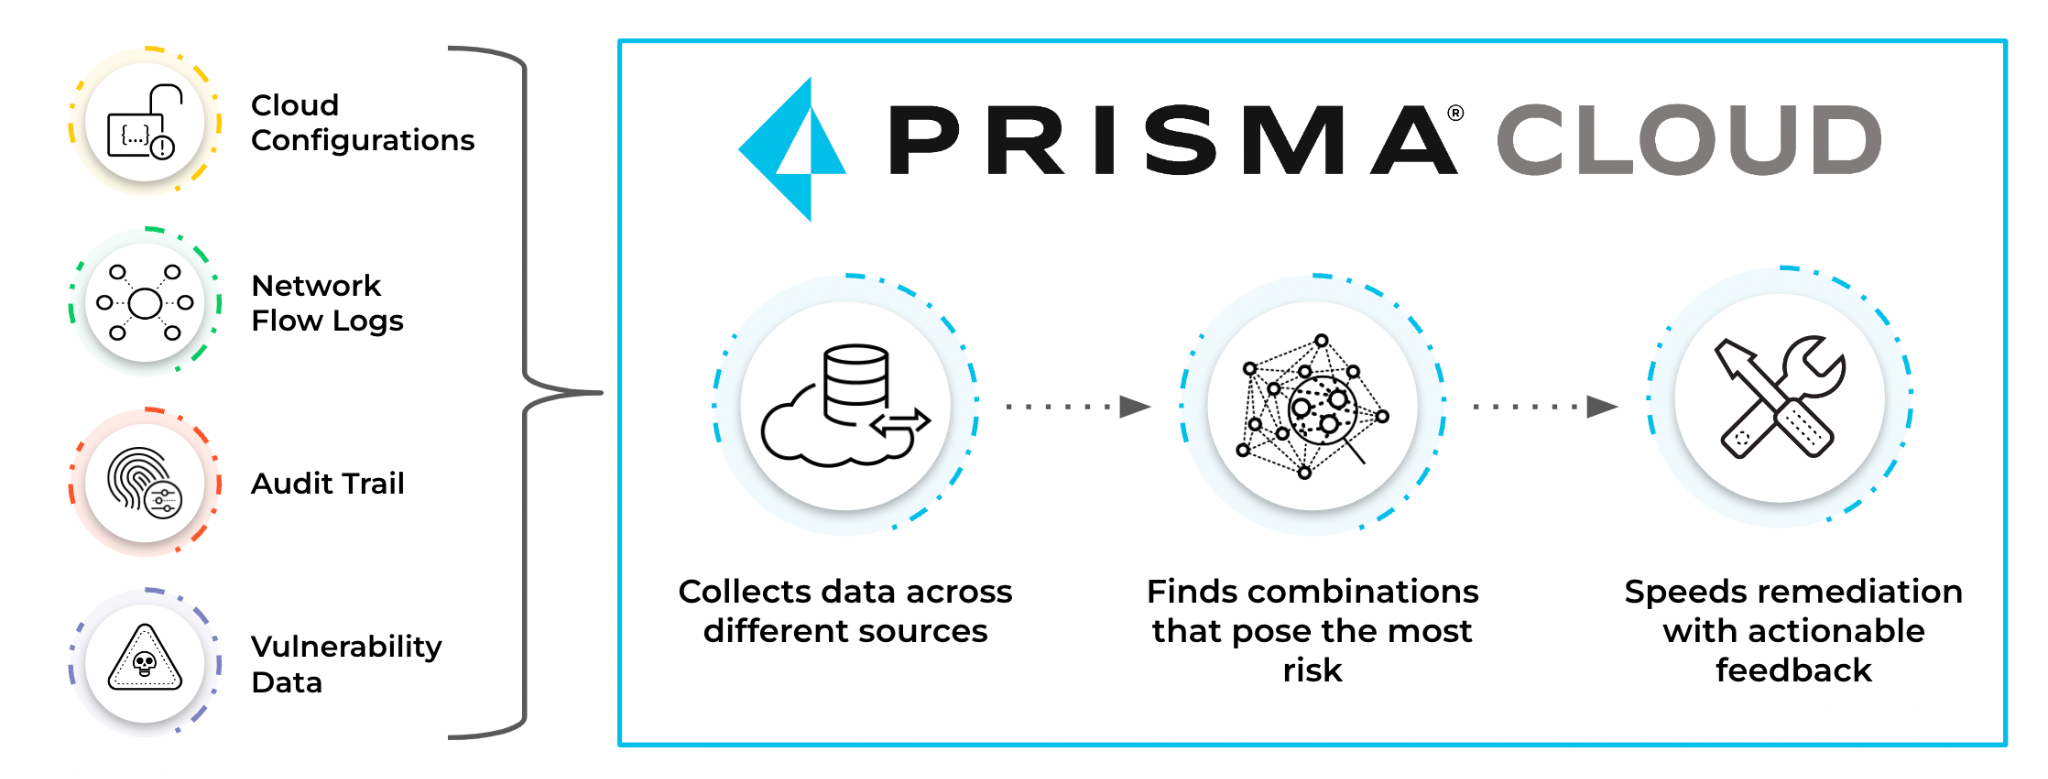 Prisma Cloud’s contextual engine distinguishes harmful combinations from less urgent issues